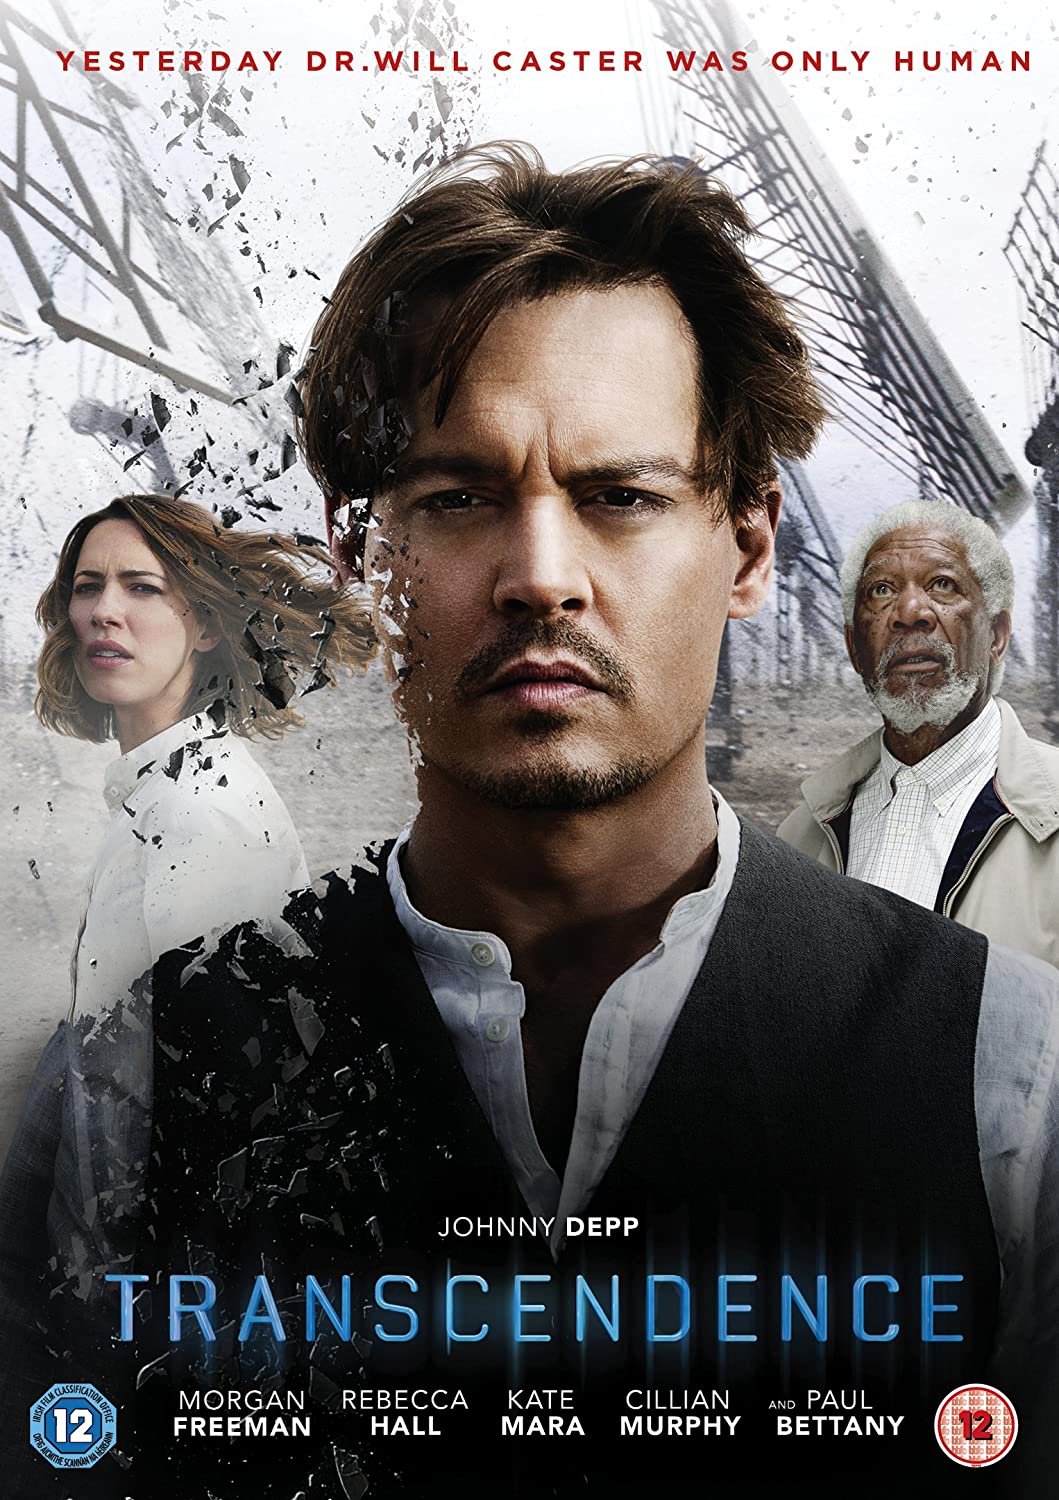 Transcendence [2017] – Science-Fiction/Action [DVD]